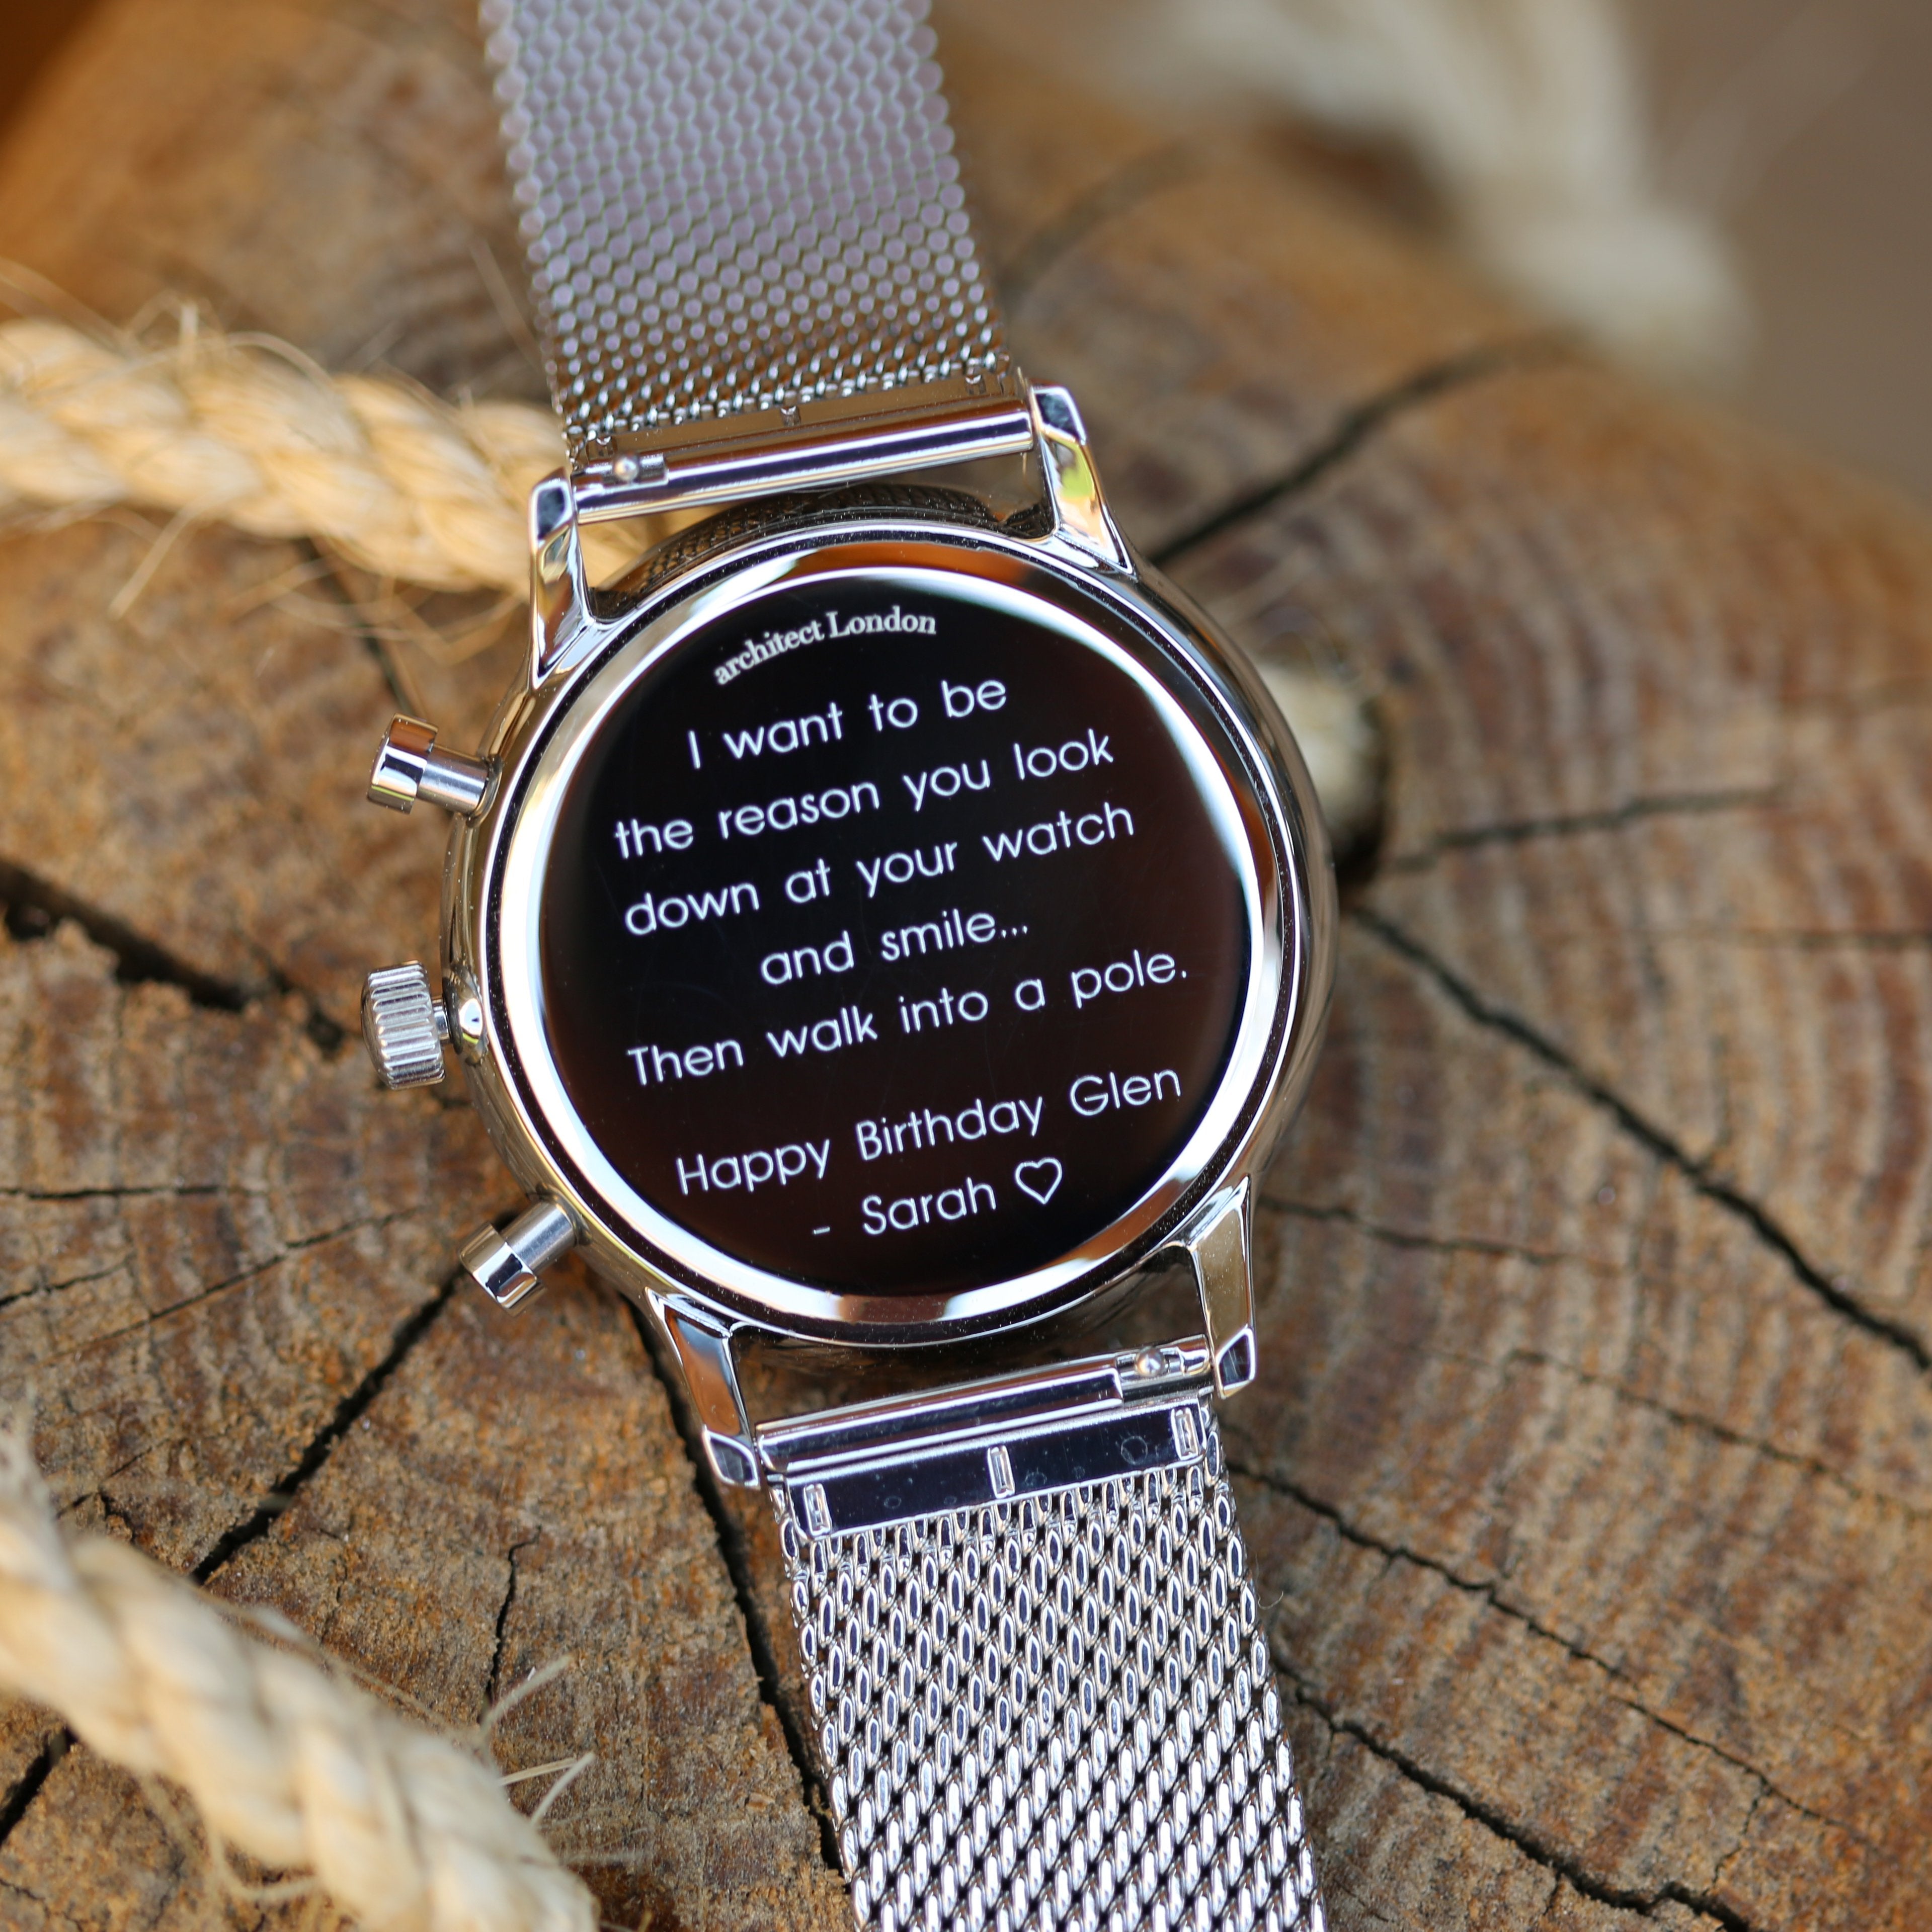 Men's Architect Motivator In Blue With Silver Mesh Strap - Modern Font Engraving